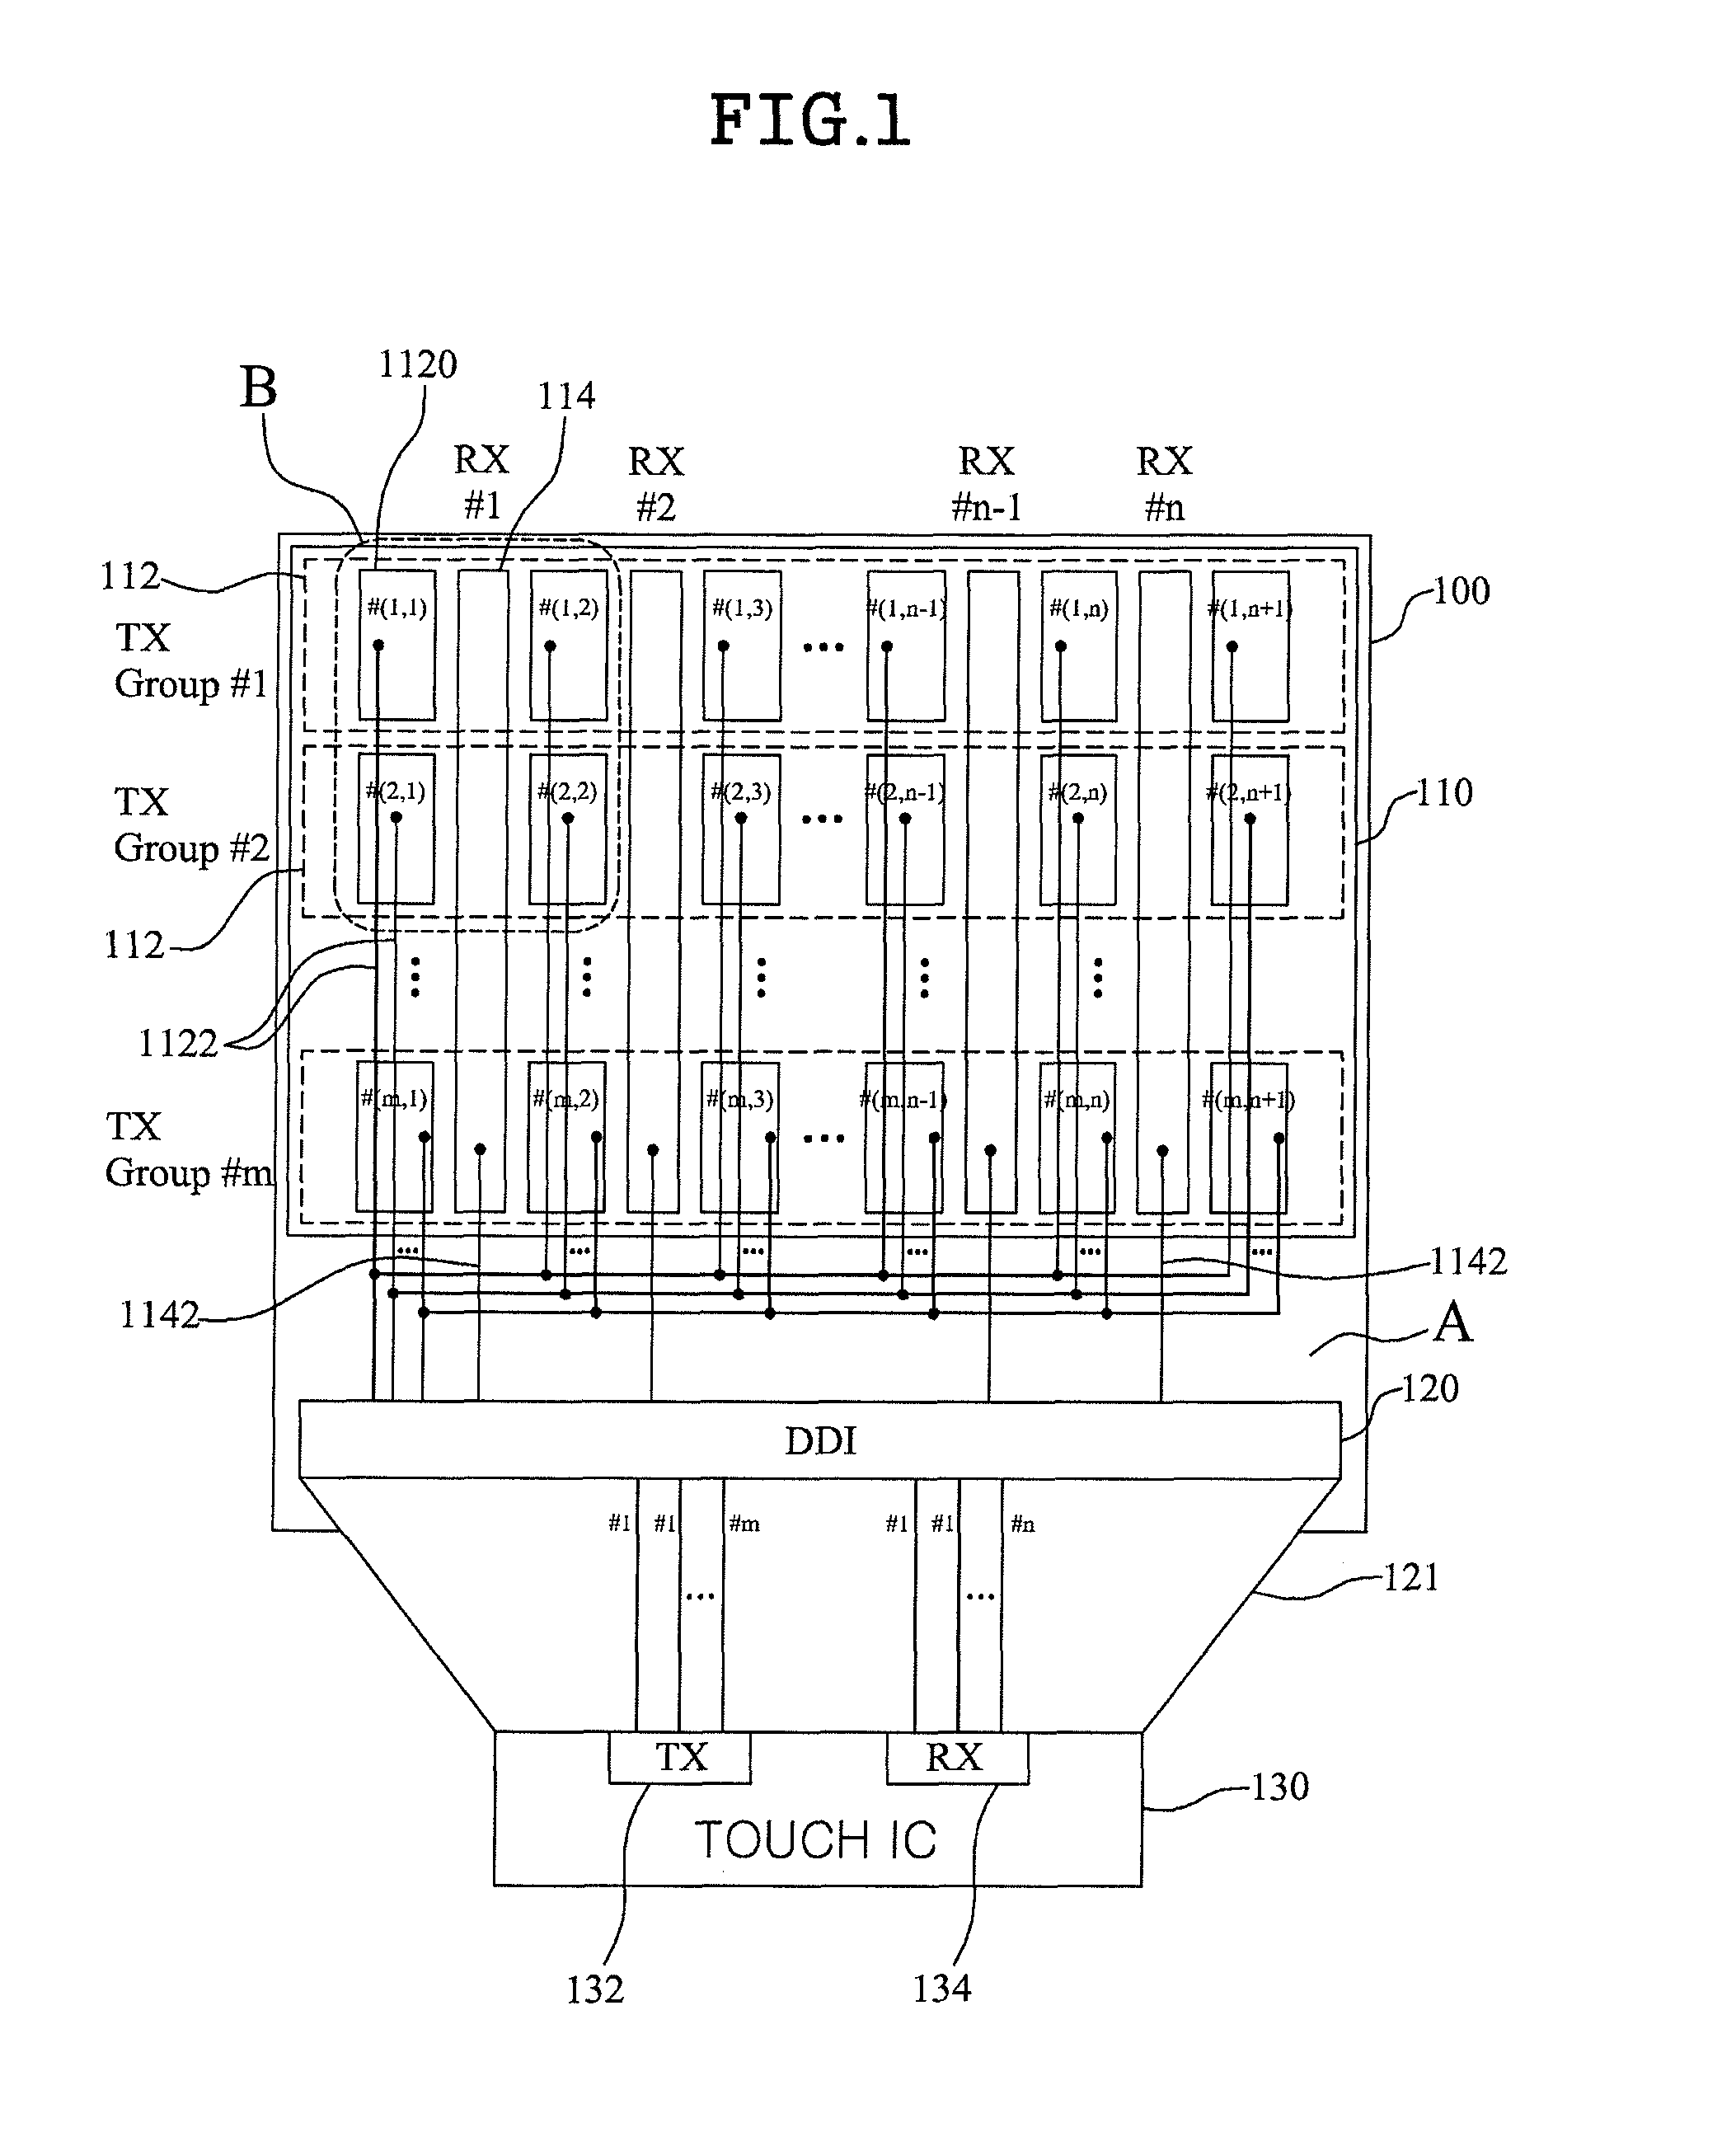 Display device with integrated touch screen